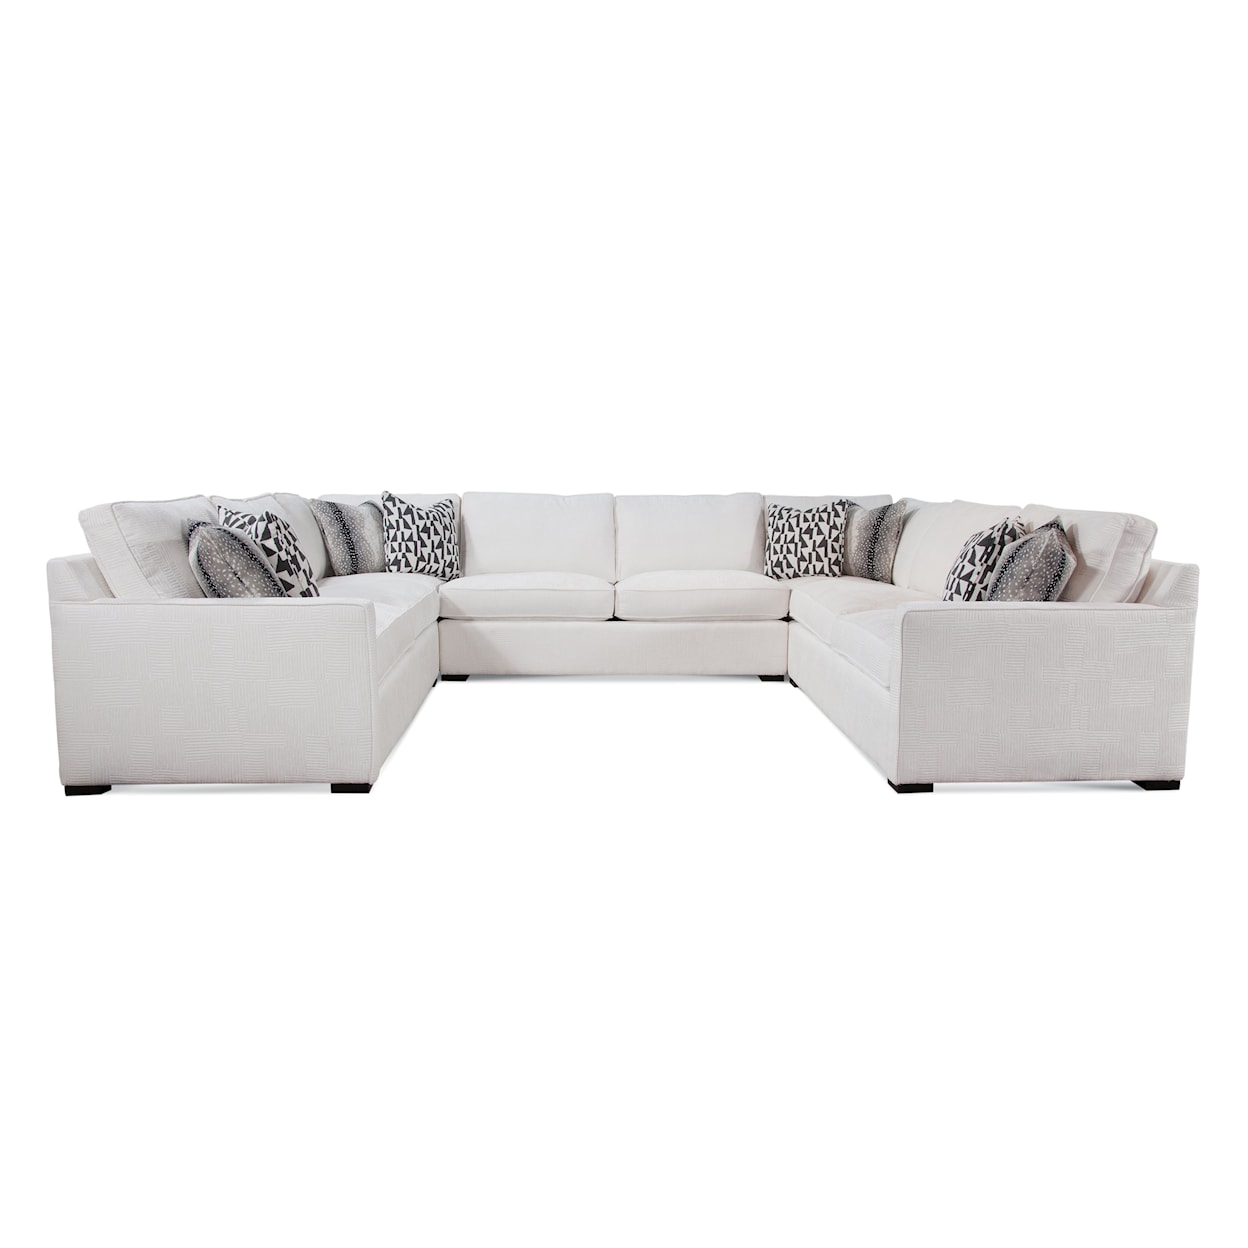 Braxton Culler Brentwood Brentwood Five Piece U-Shape Sectional